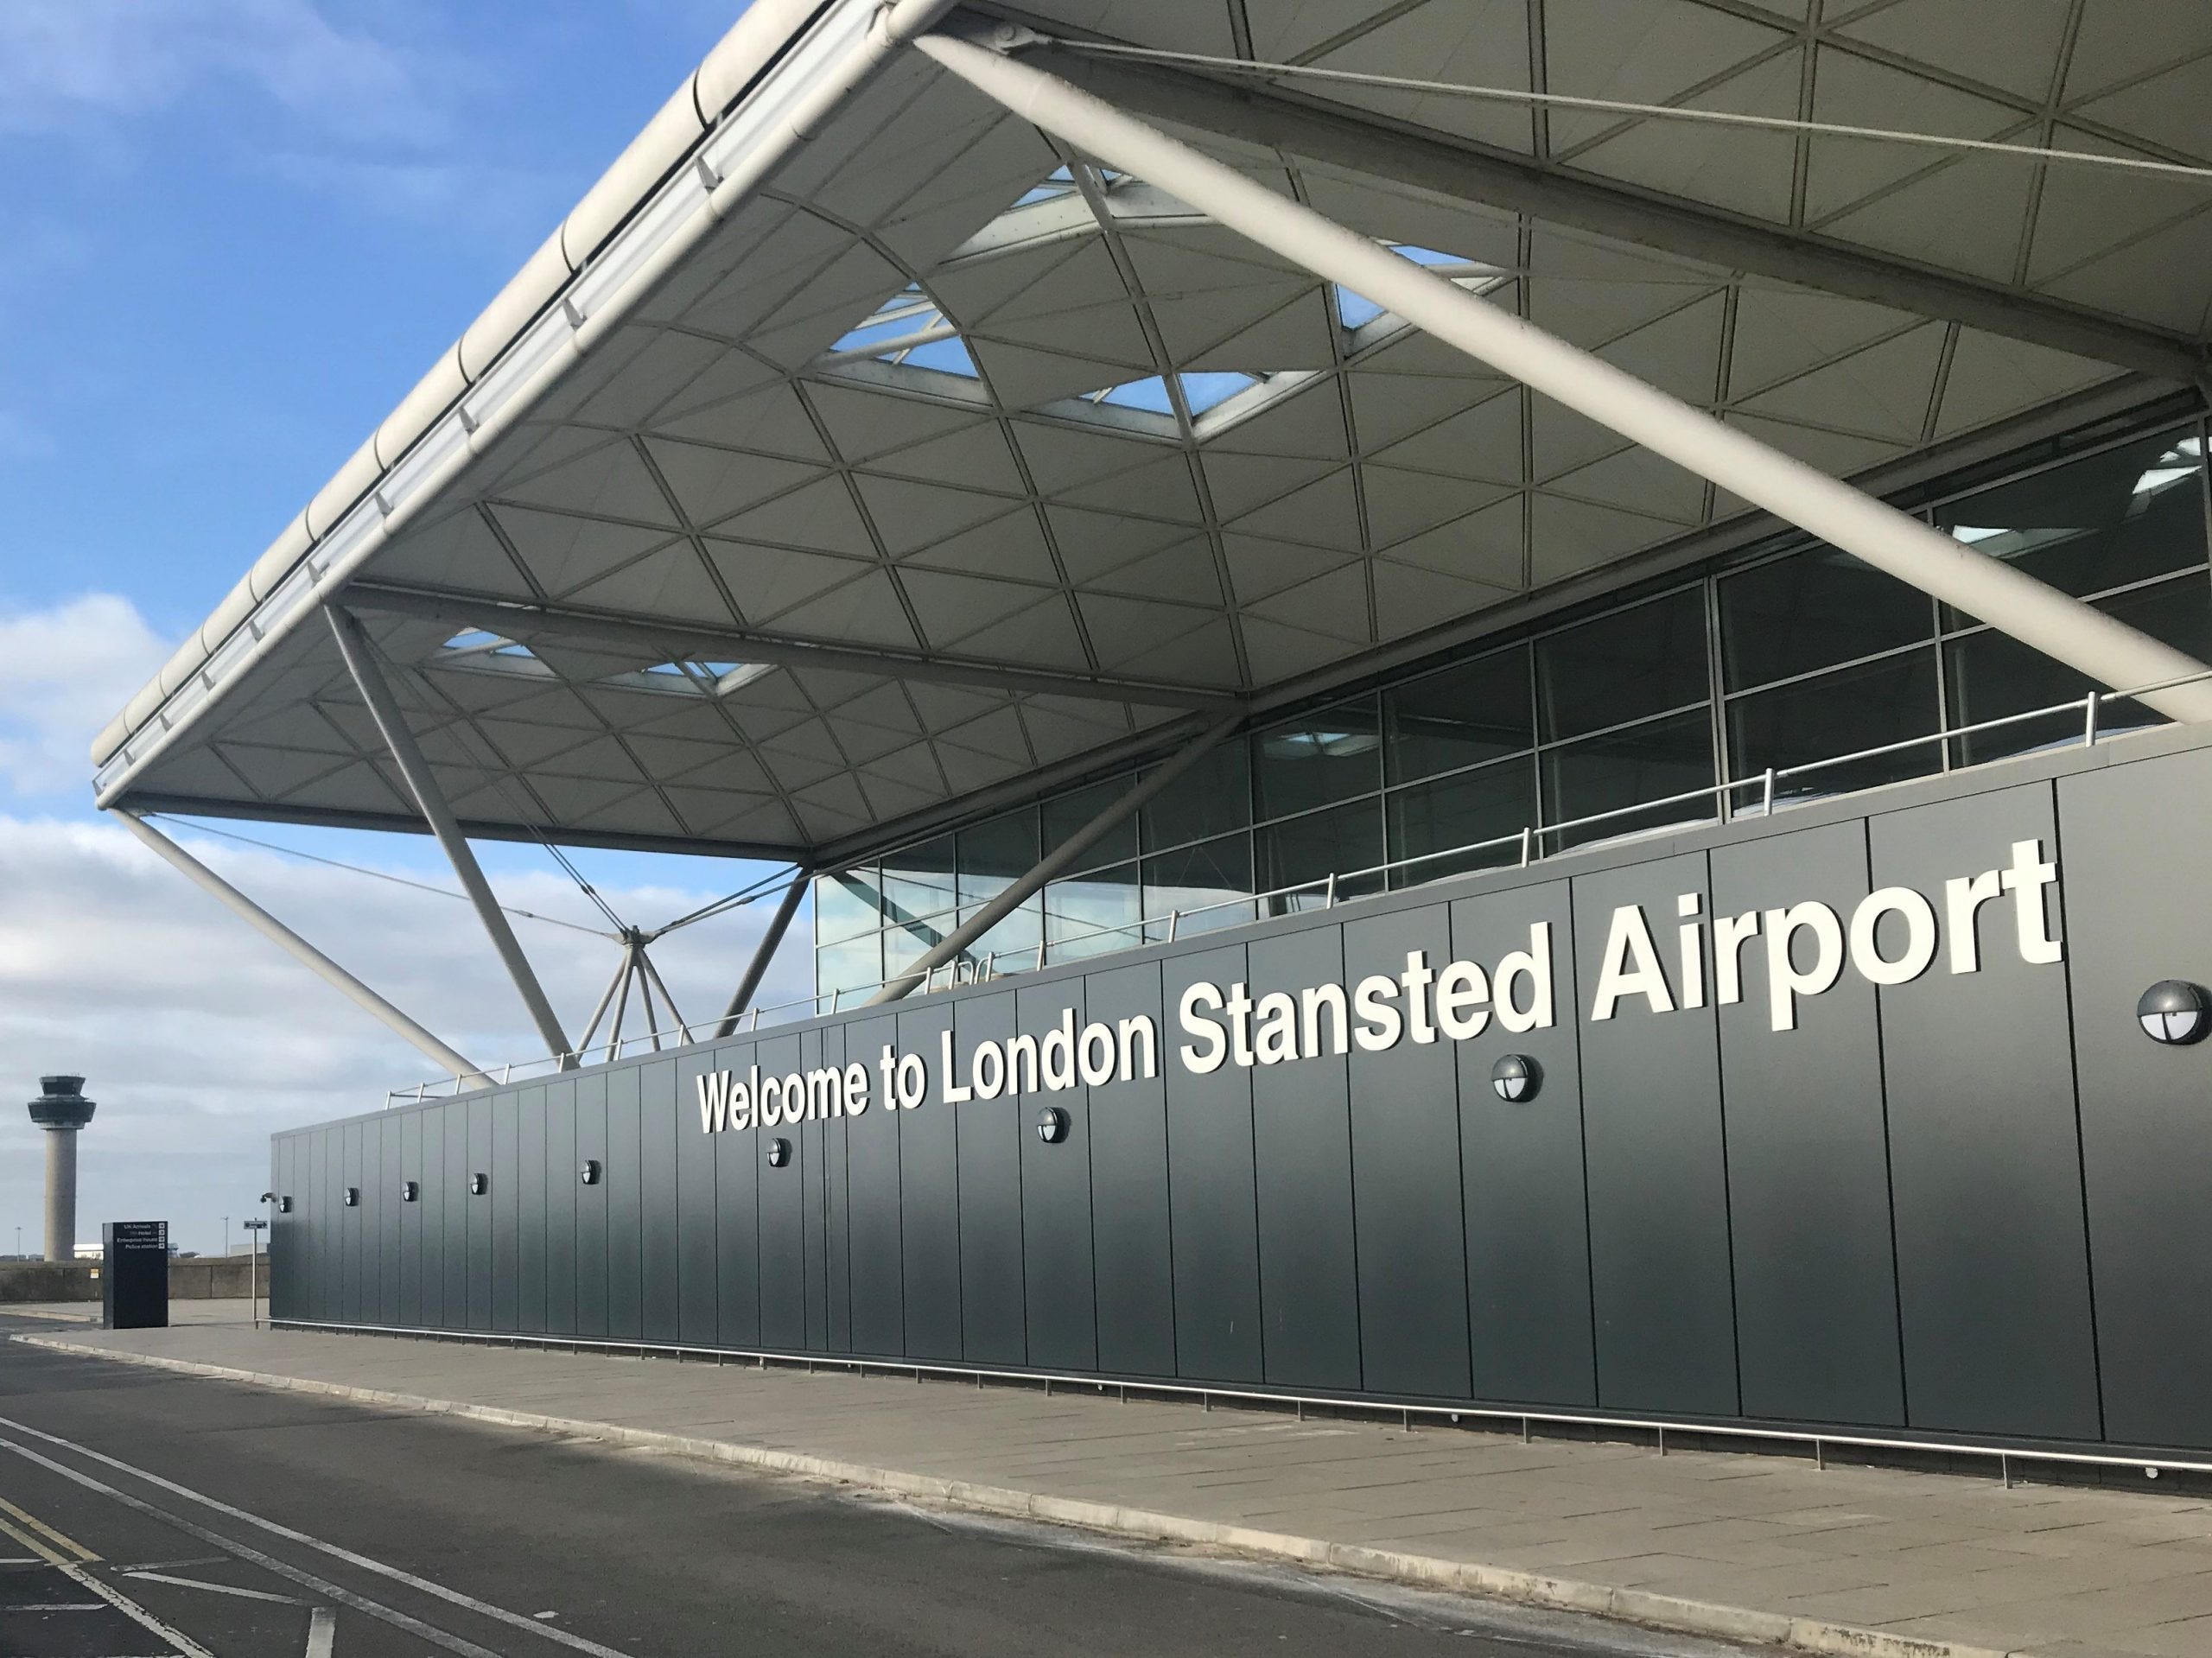 How To Get Flight Data Of Stansted Airport Using An API